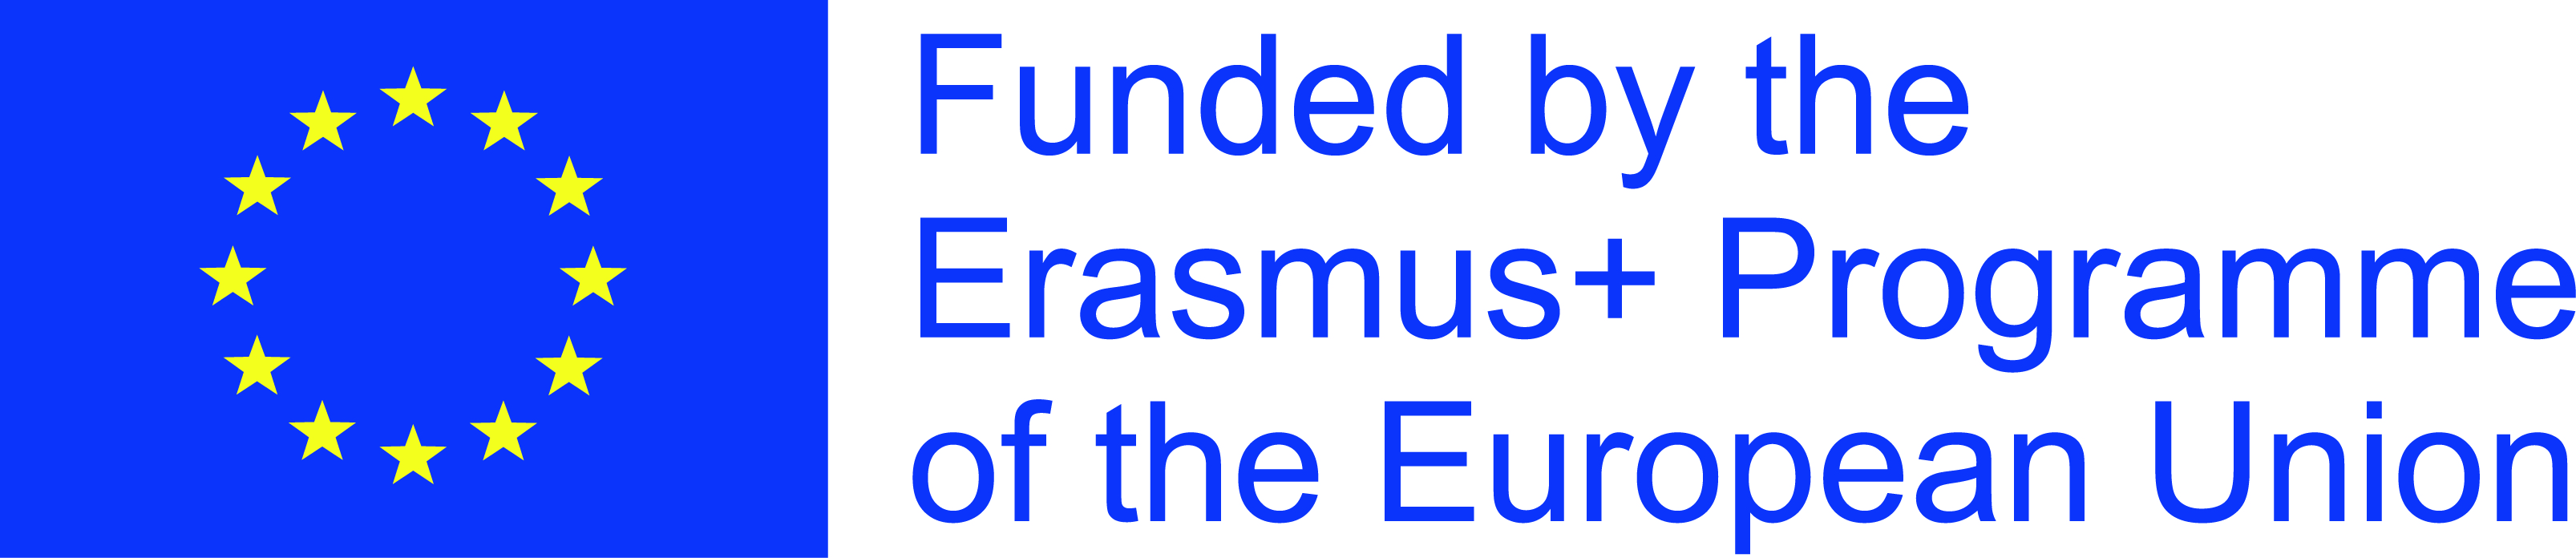 Erasmus logo using EU flag and text: "Founded by the Erasmus+ Programme of the European Union"